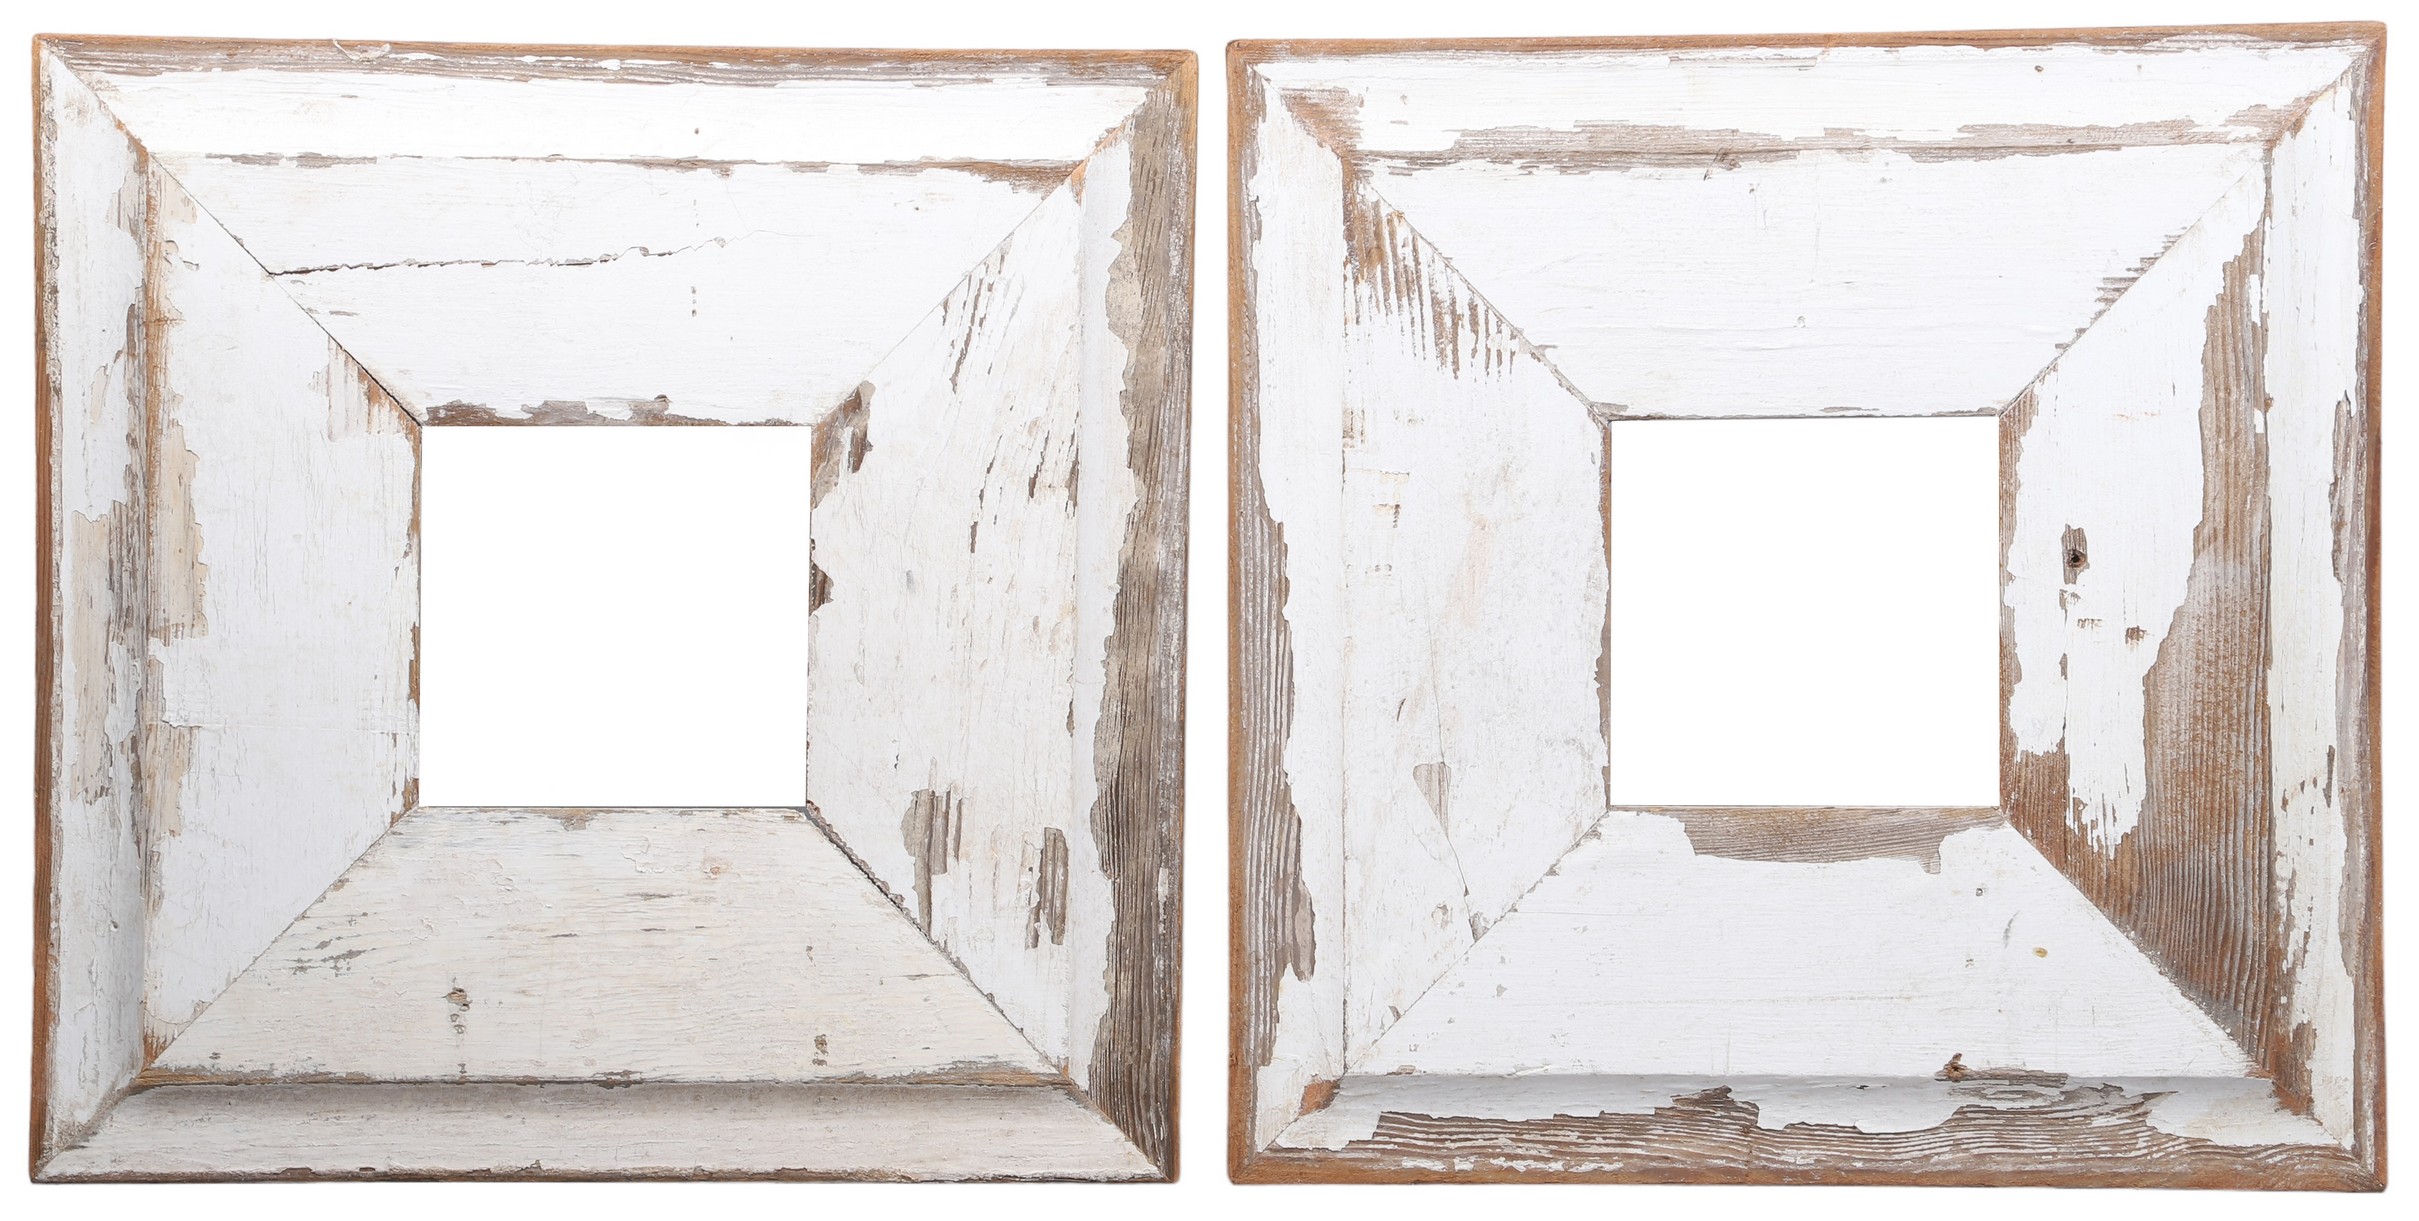 A pair of rustic wooden white picture 2e0cb9